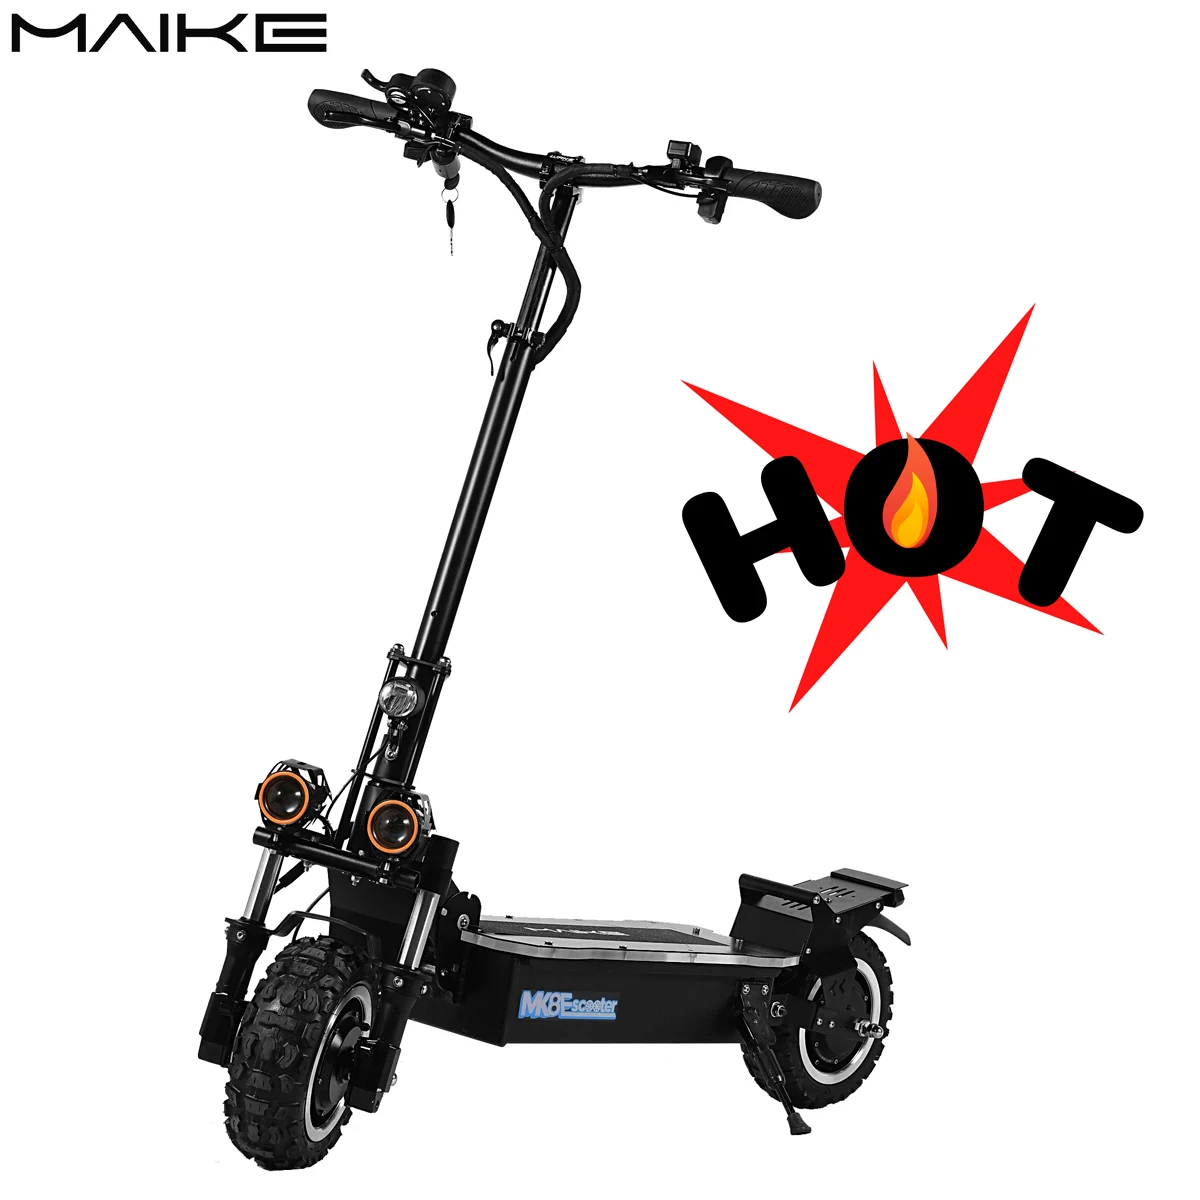 

Wholesale High Quality maike mk8 e scooter offroad 5000w double motor electric scooter high range fast 80kmh scooter